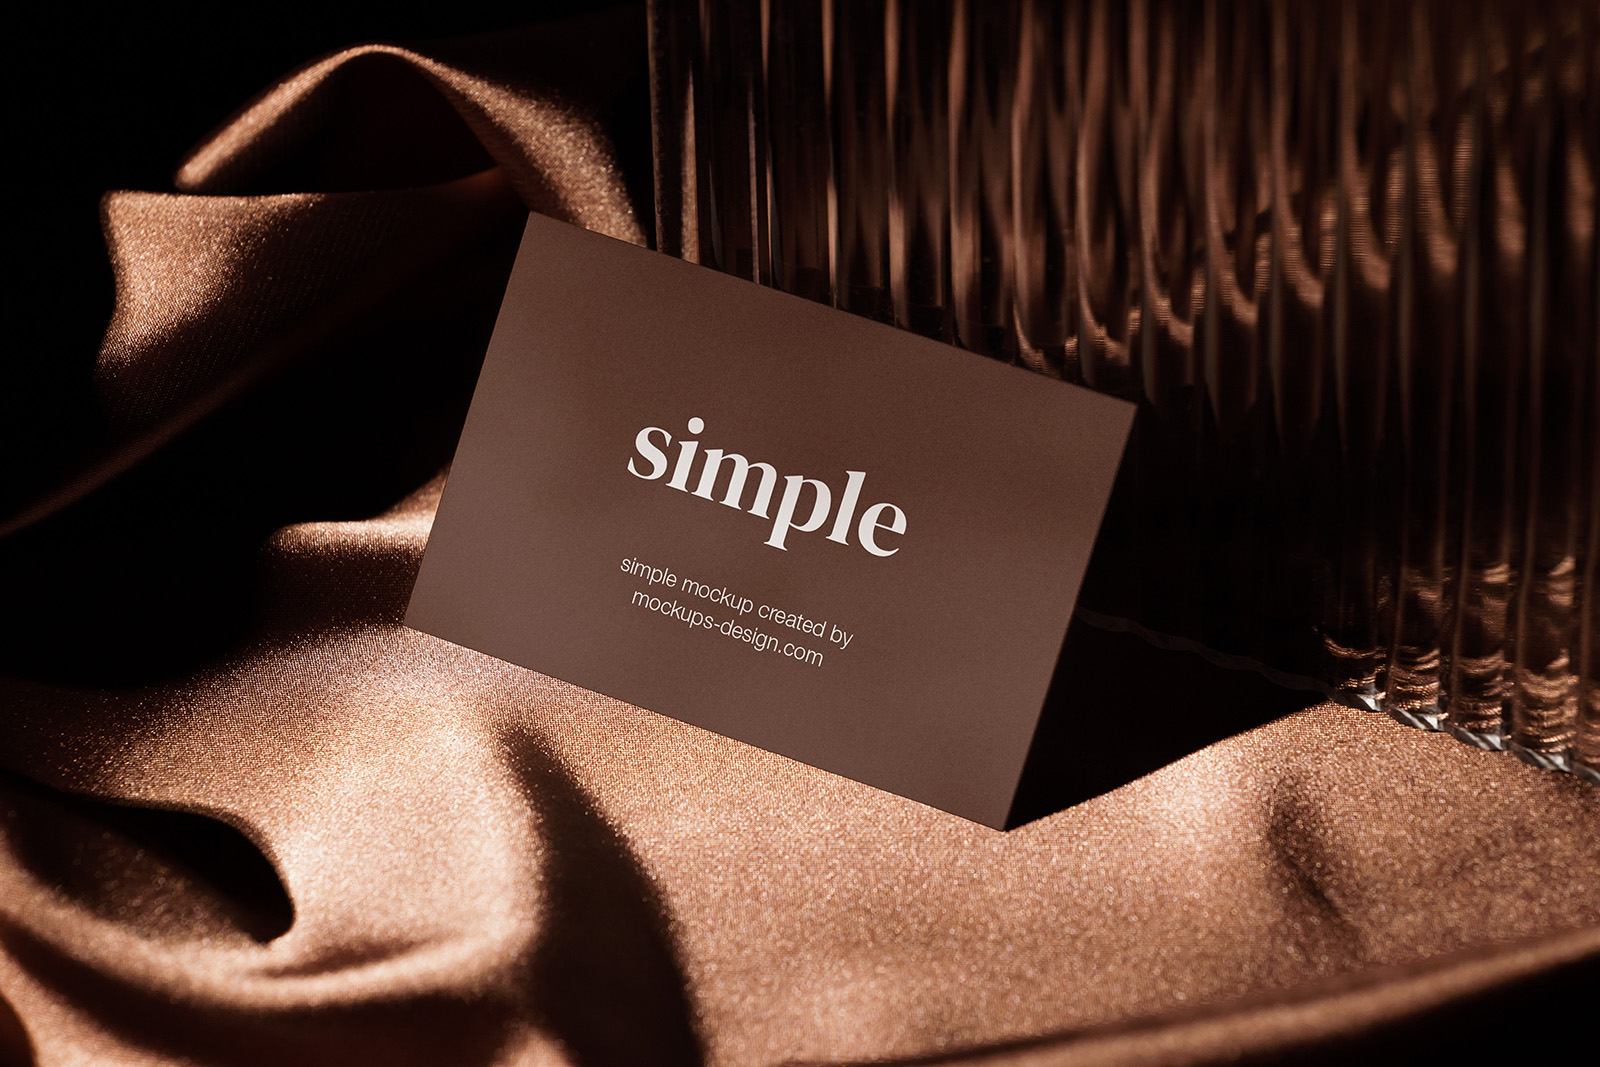 Business card on brown fabric mockup